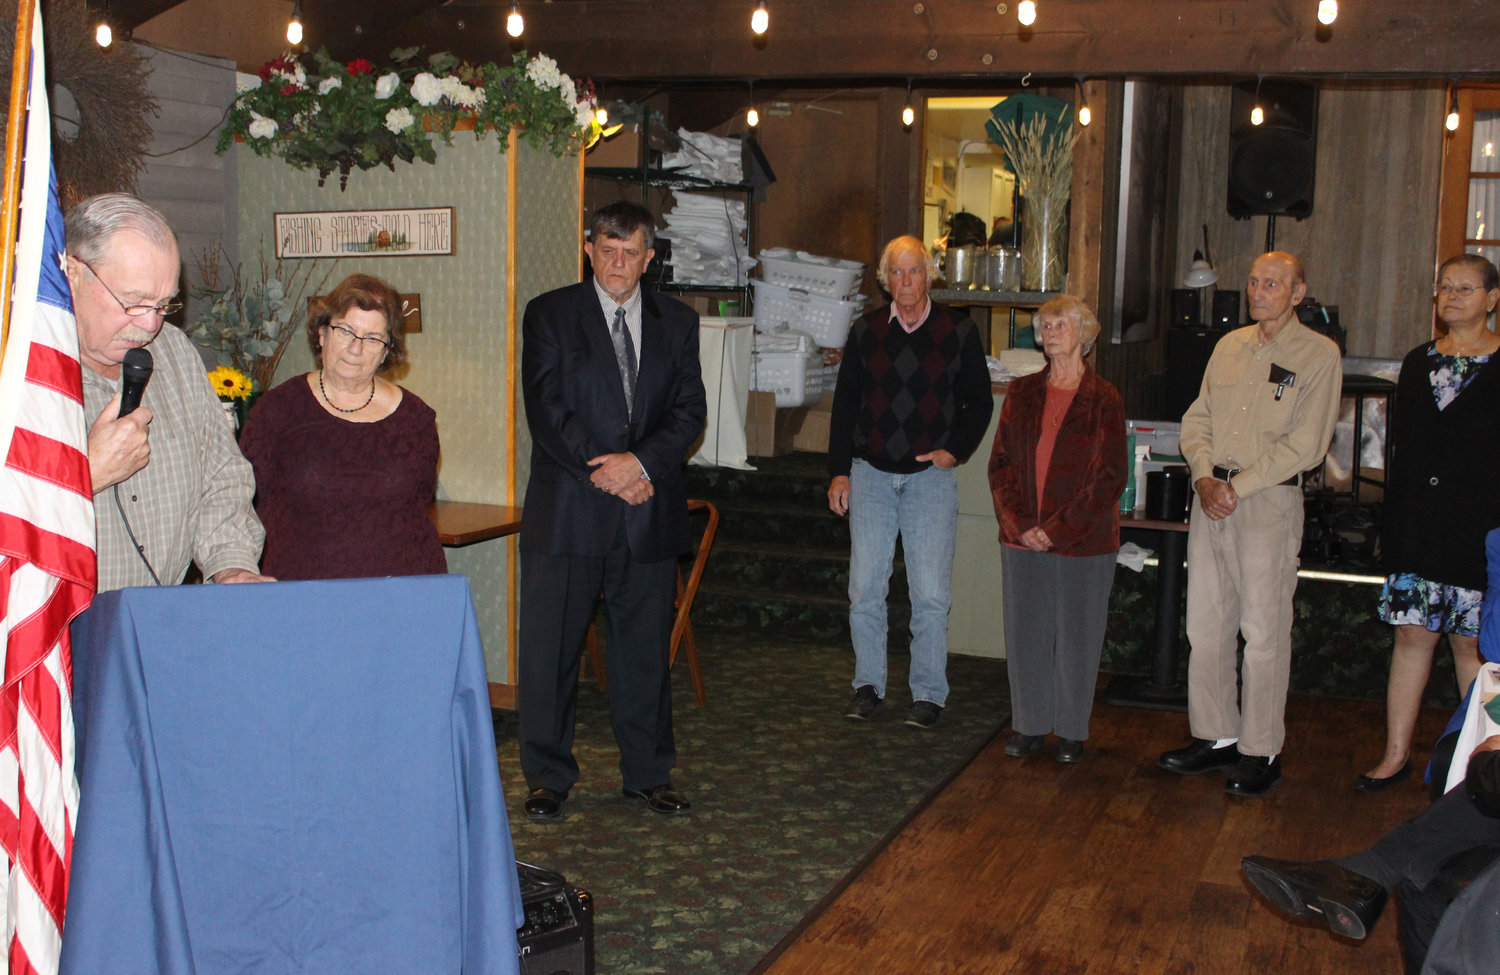 Sullivan County Historical Society Director Earl “Butch” Kortright presided over the election of new officers. Standing alongside him are newly elected Historical Society President Suzanne Cecil and Vice President Aldo Troiani.